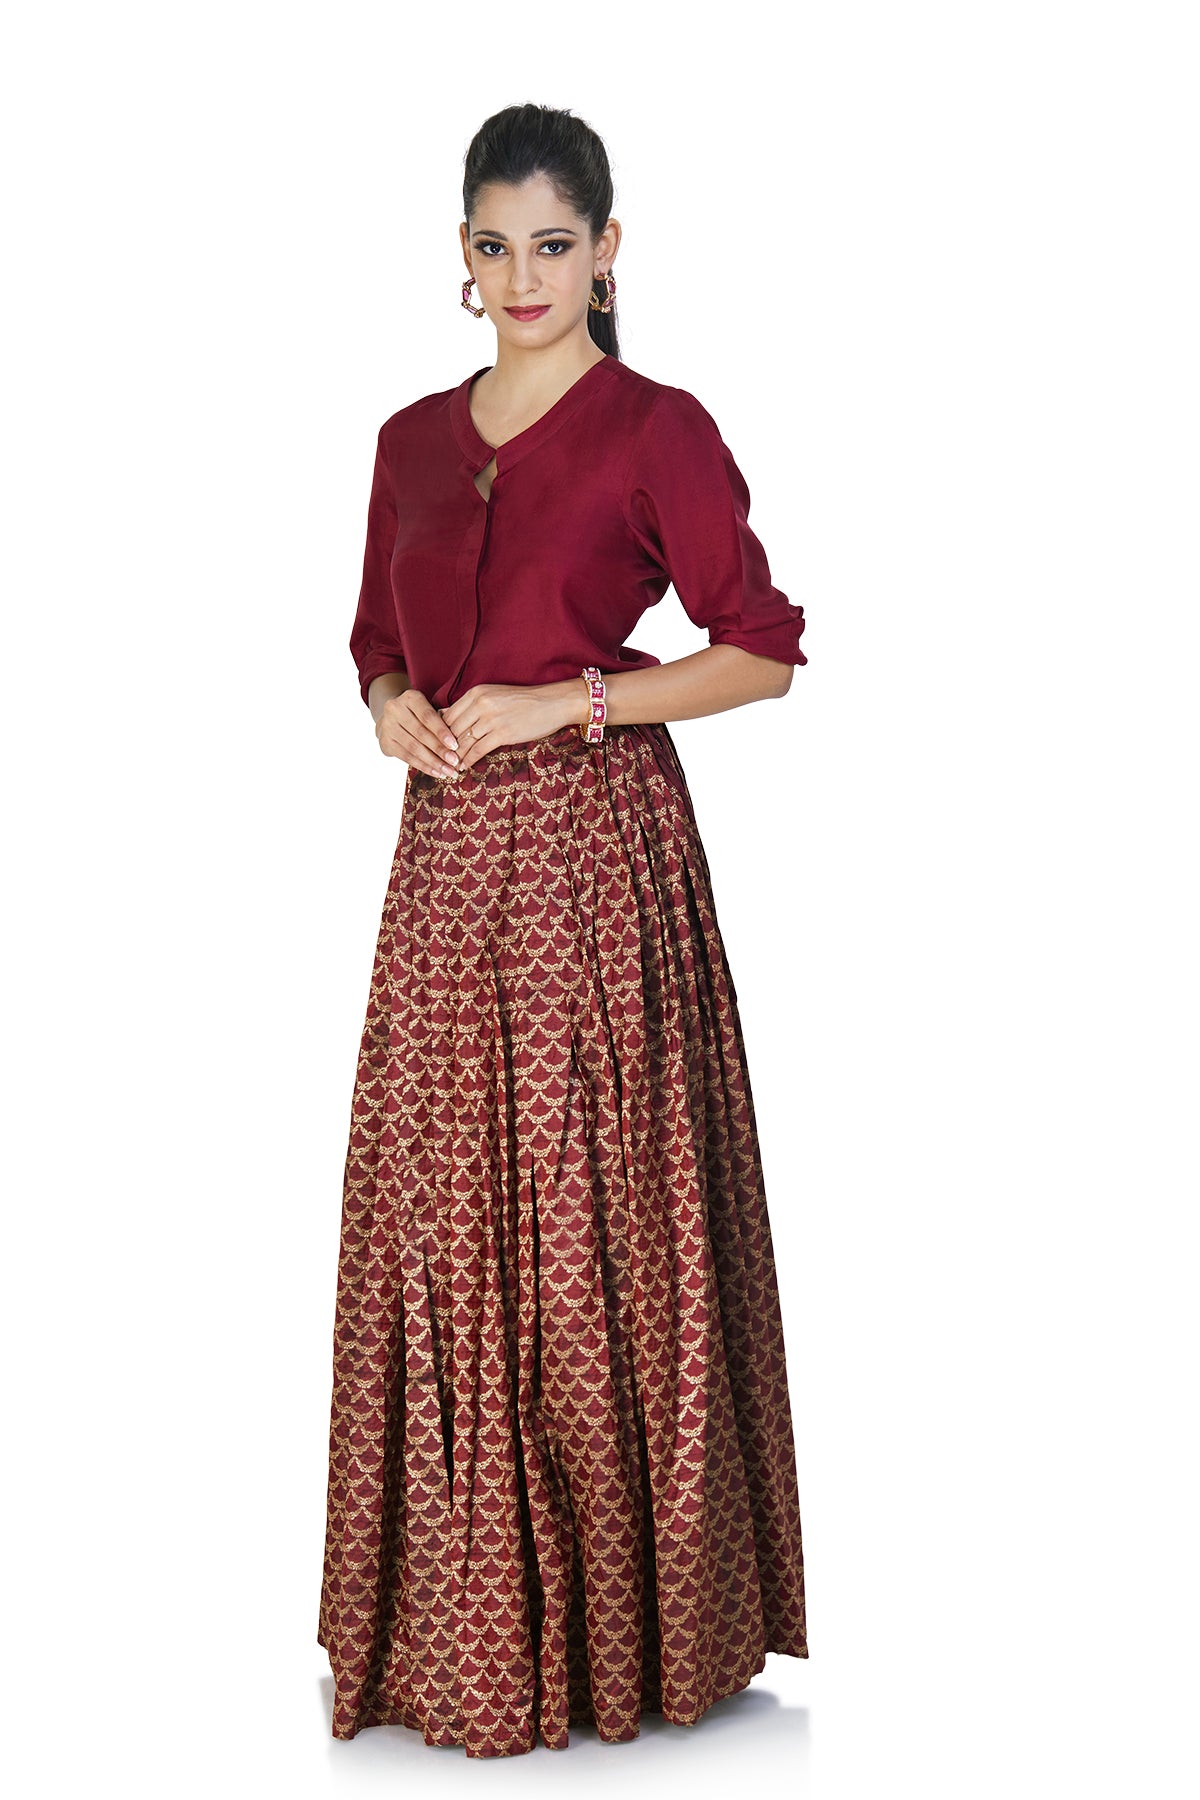 Twirl to all your favorite Bollywood songs this Shaadi season with this breezy outfit minus all the worries. The red top looks best when it is tucked inside the rich brocade skirt.